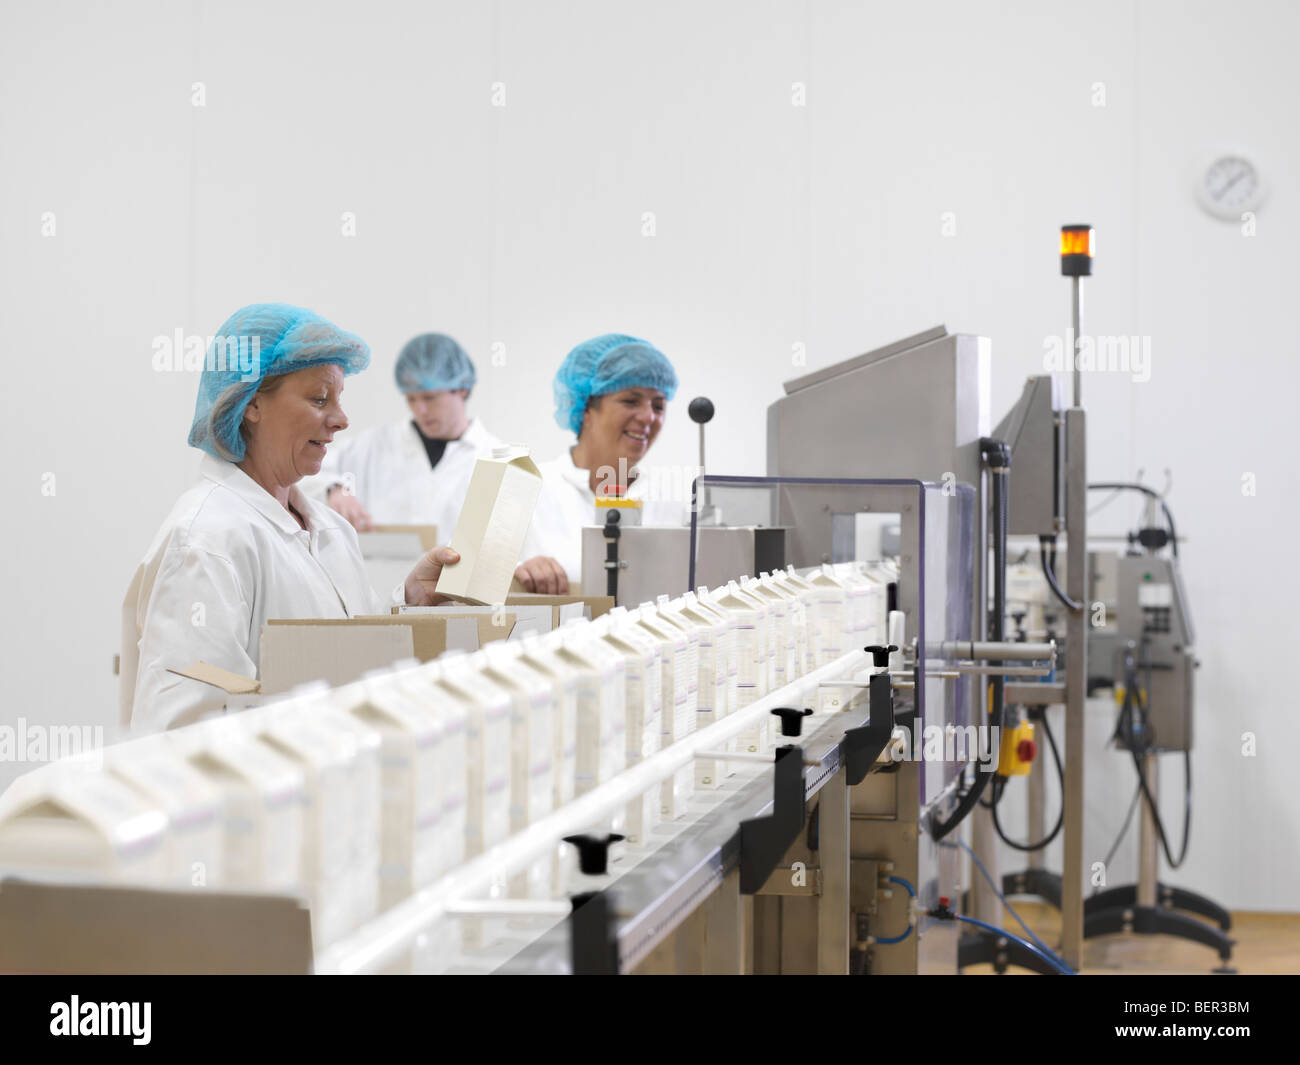 Food Workers On Production Line Stock Photo